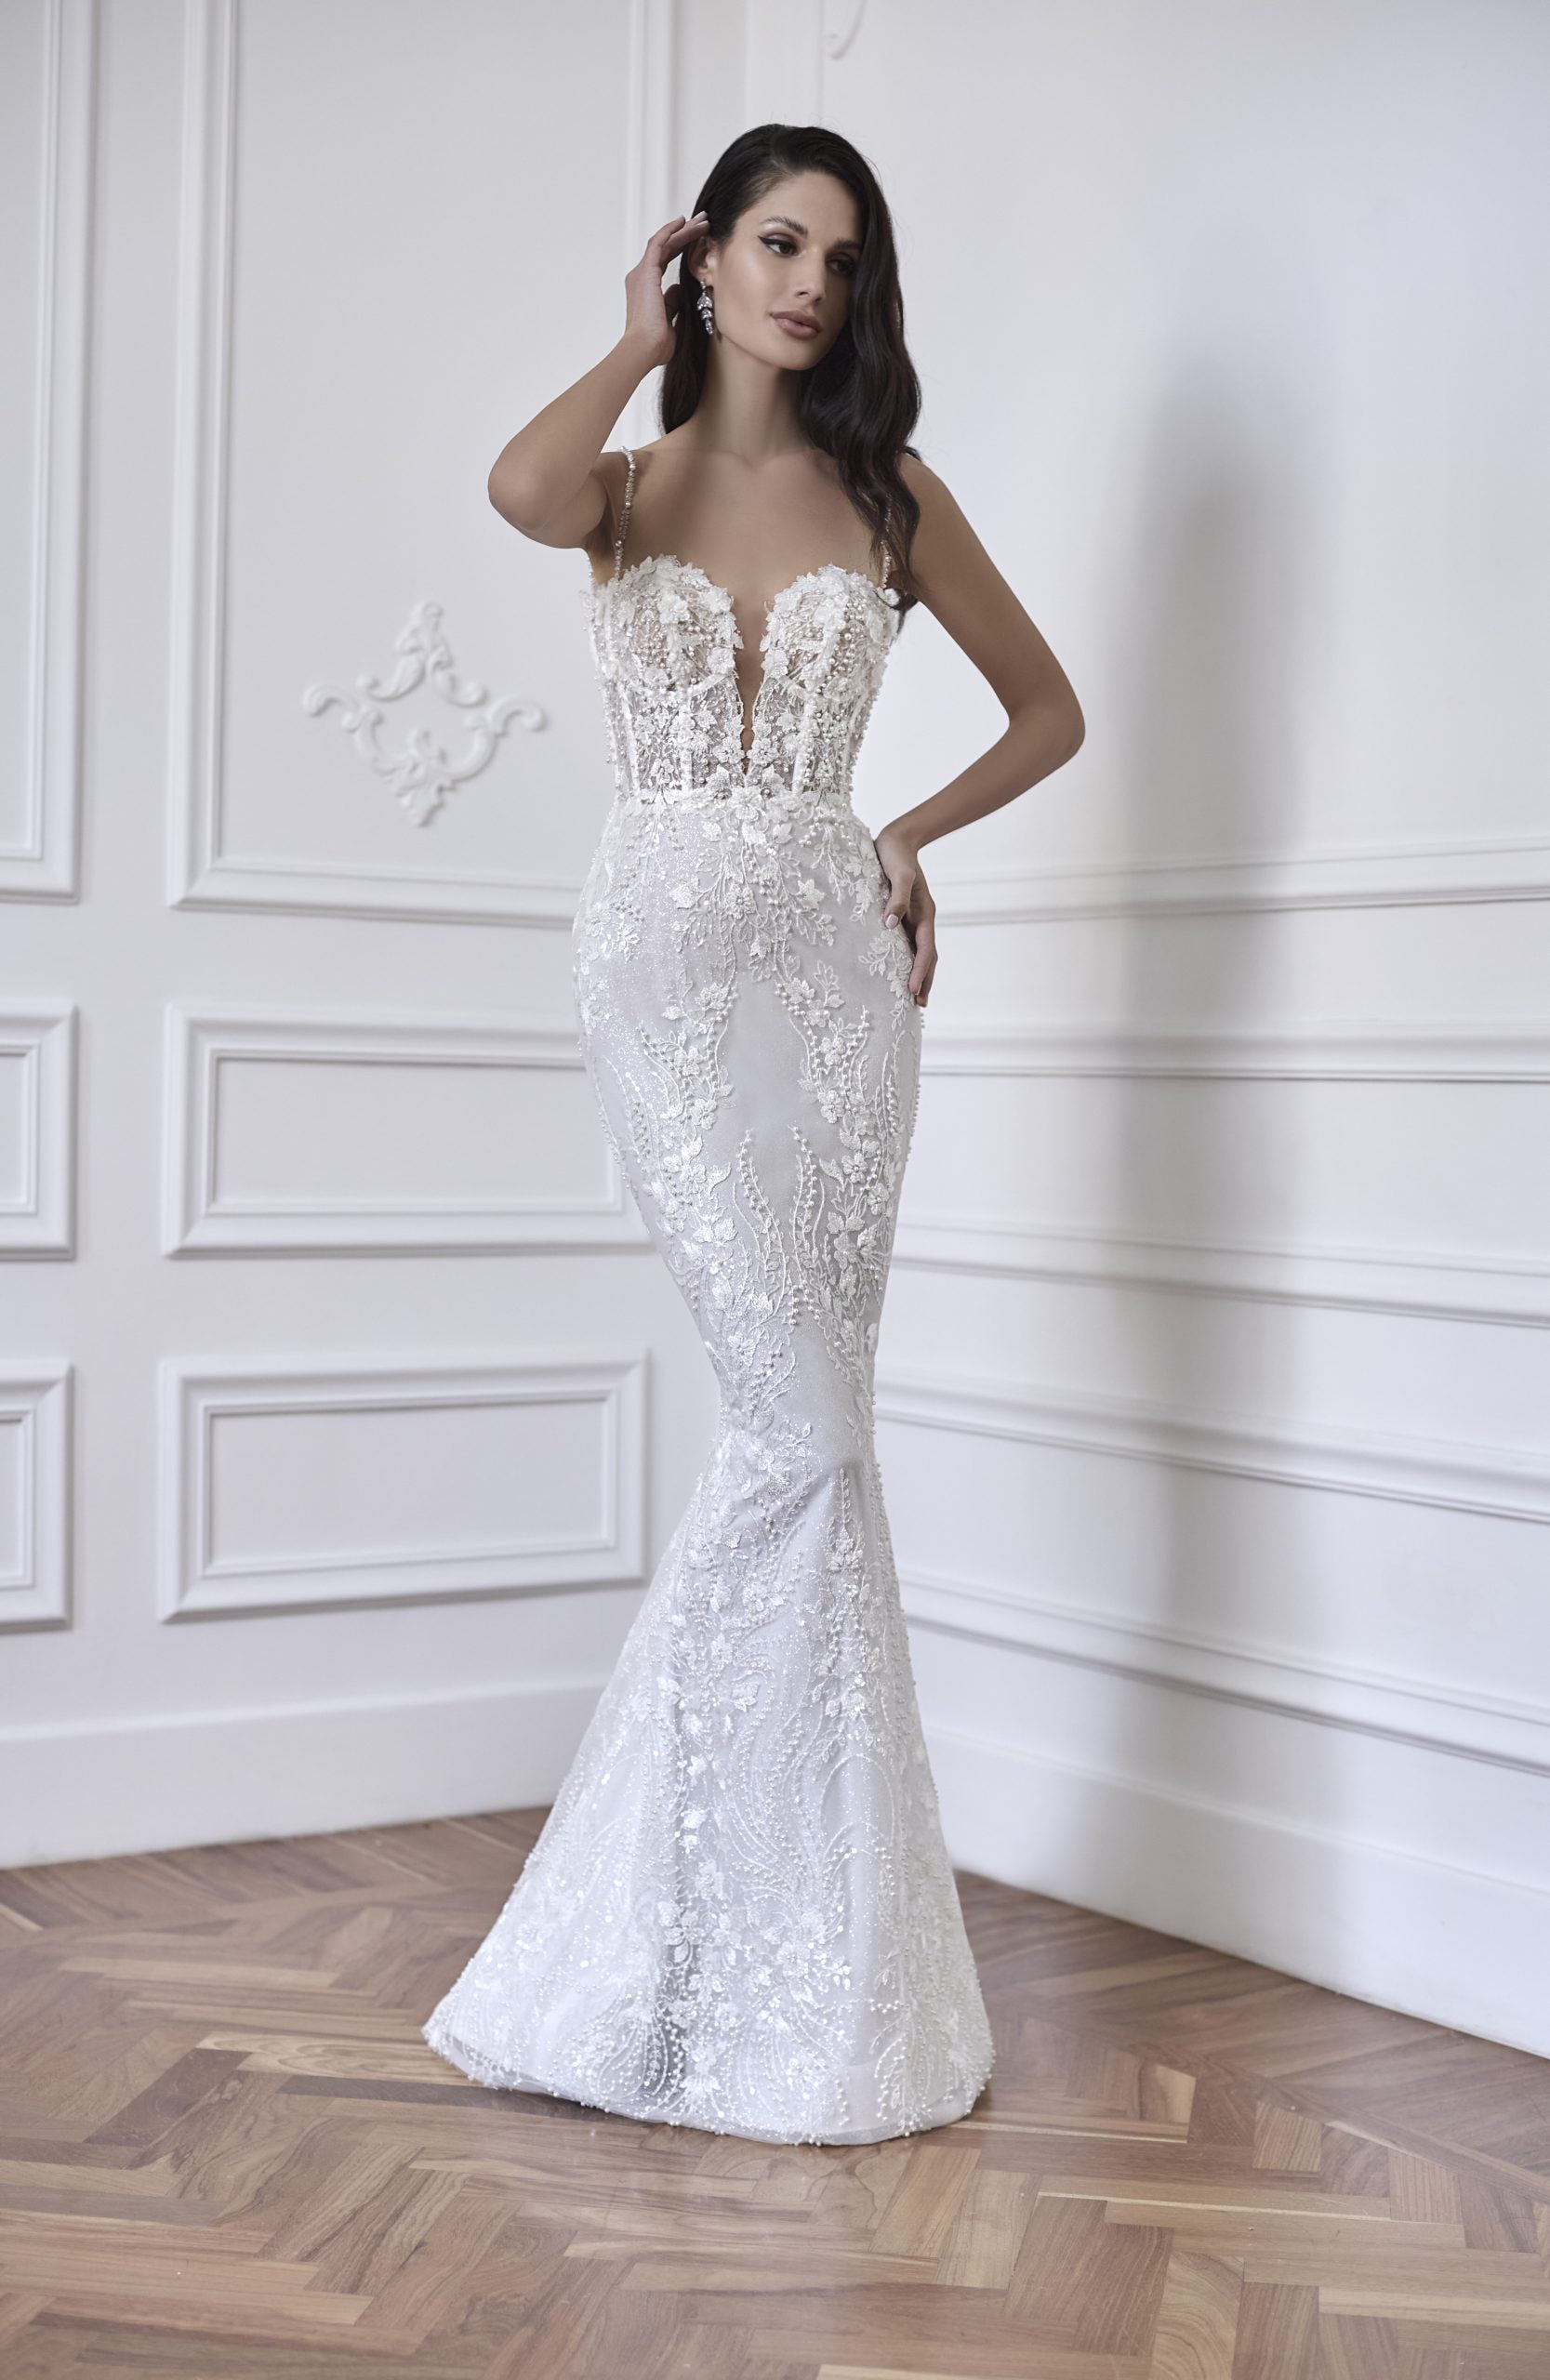 Fit And Flare Wedding Dress With Beaded 3D Floral Embroidery by Maison Signore - Image 1